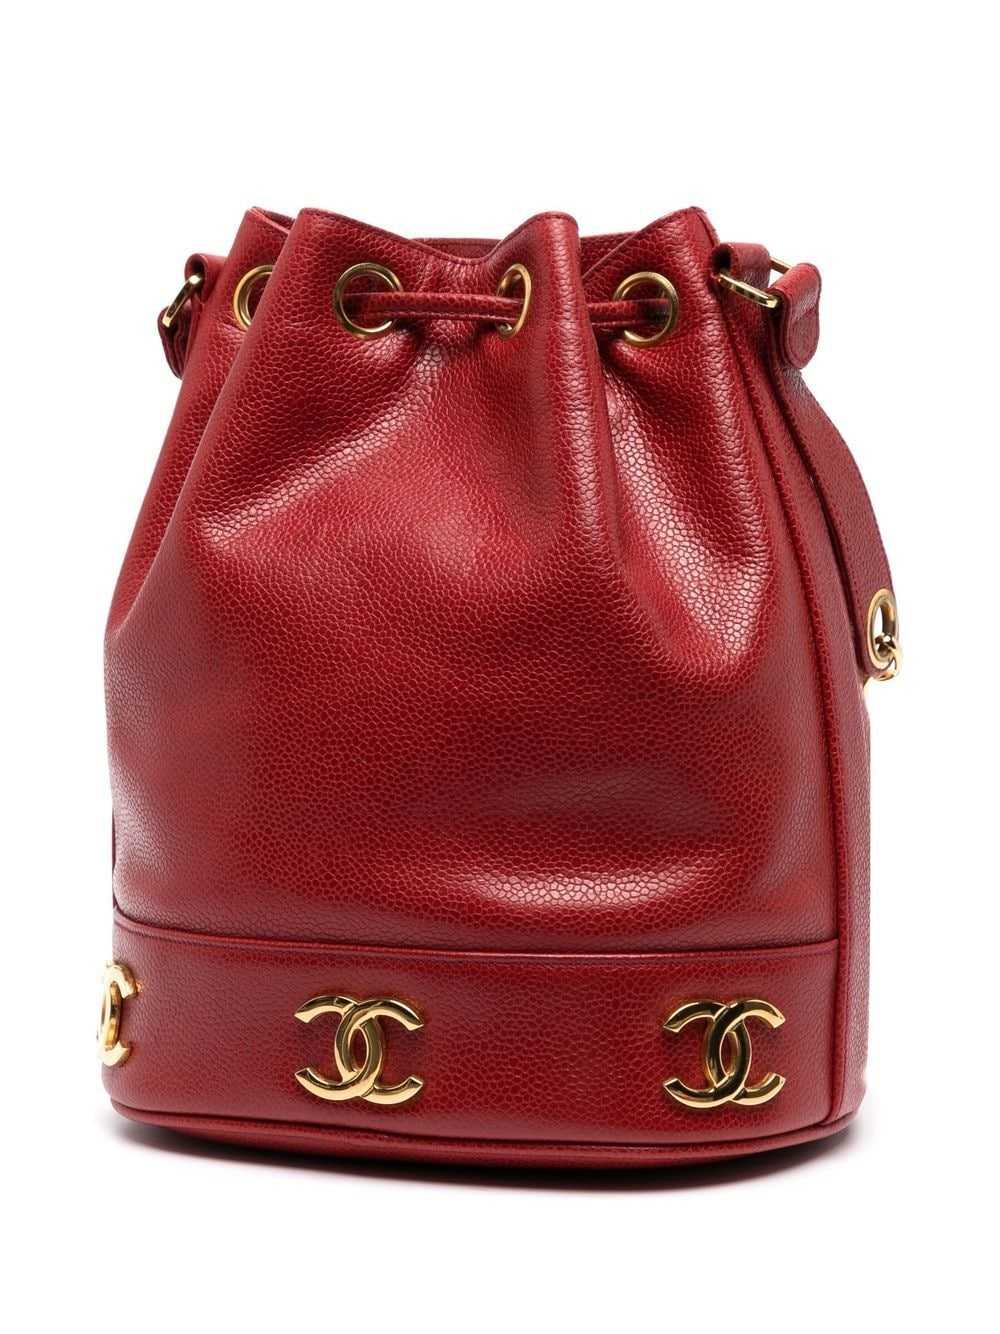 CHANEL Pre-Owned 1992 Triple CC bag - Red - image 3